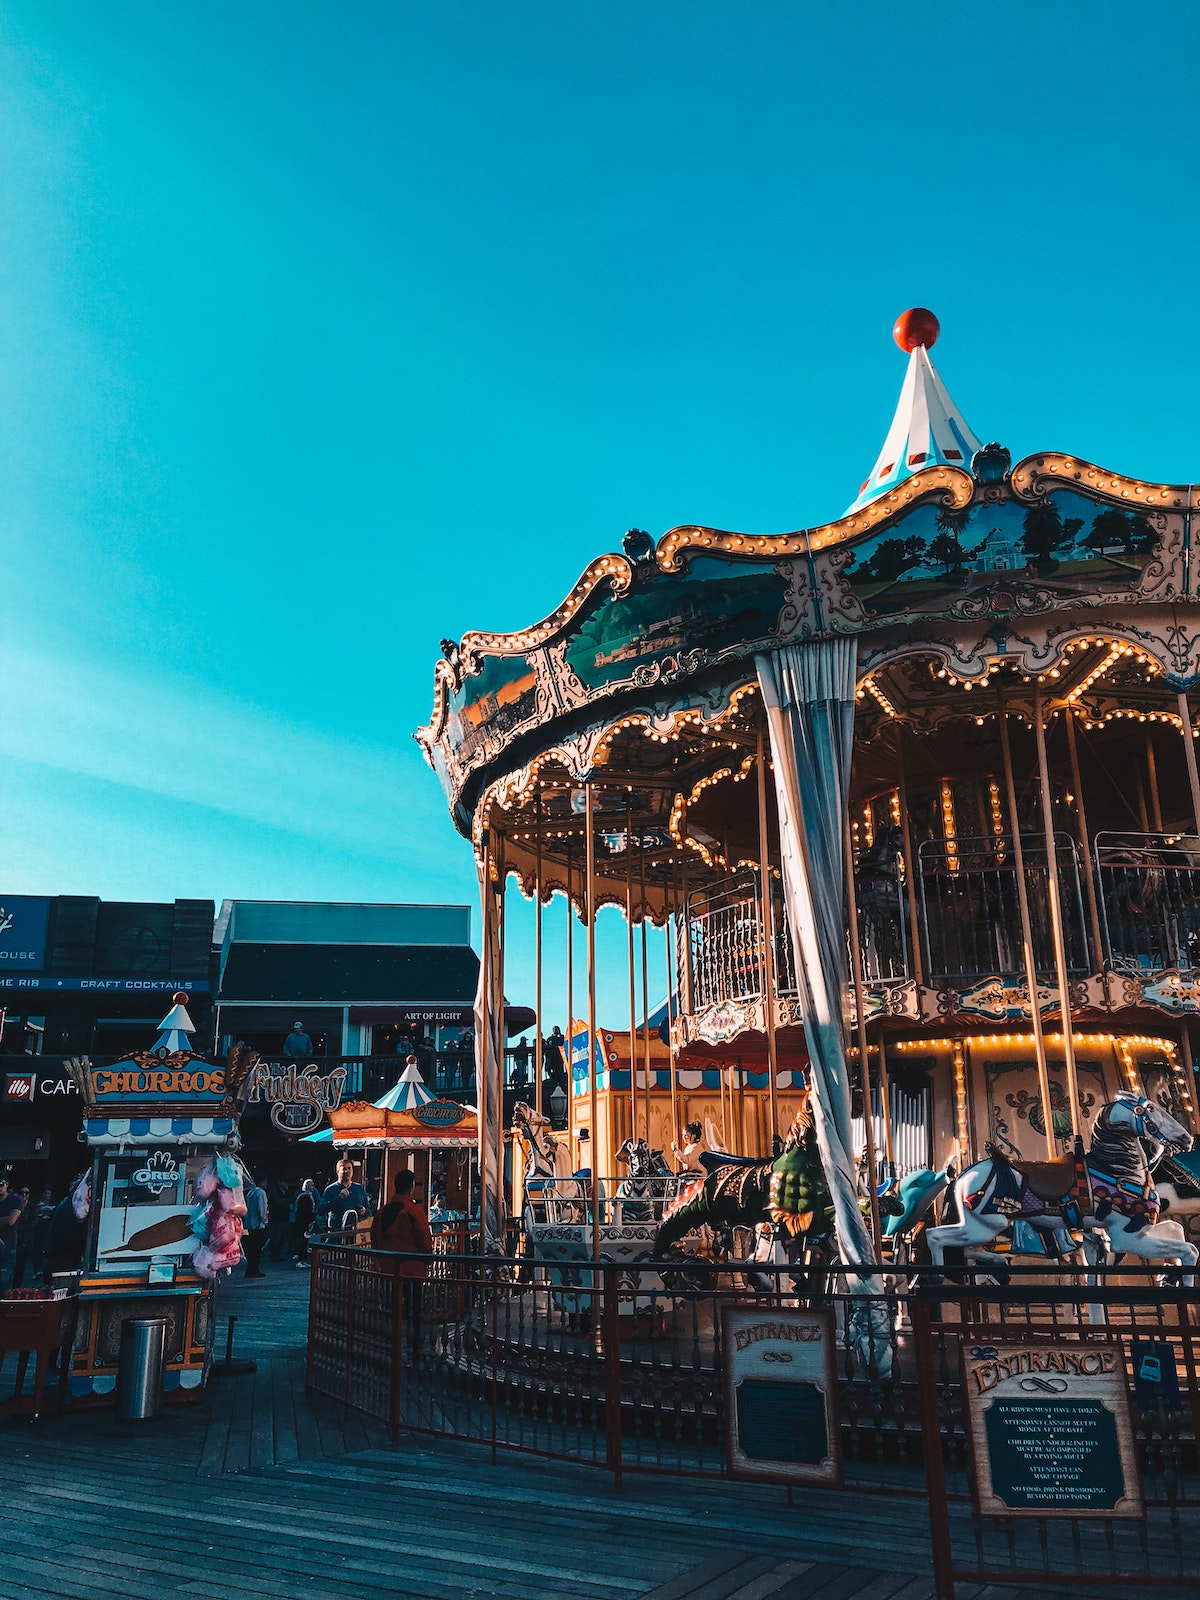 View of a retro carousel and churro stand with restaurants behind at San Francisco's Pier 39.